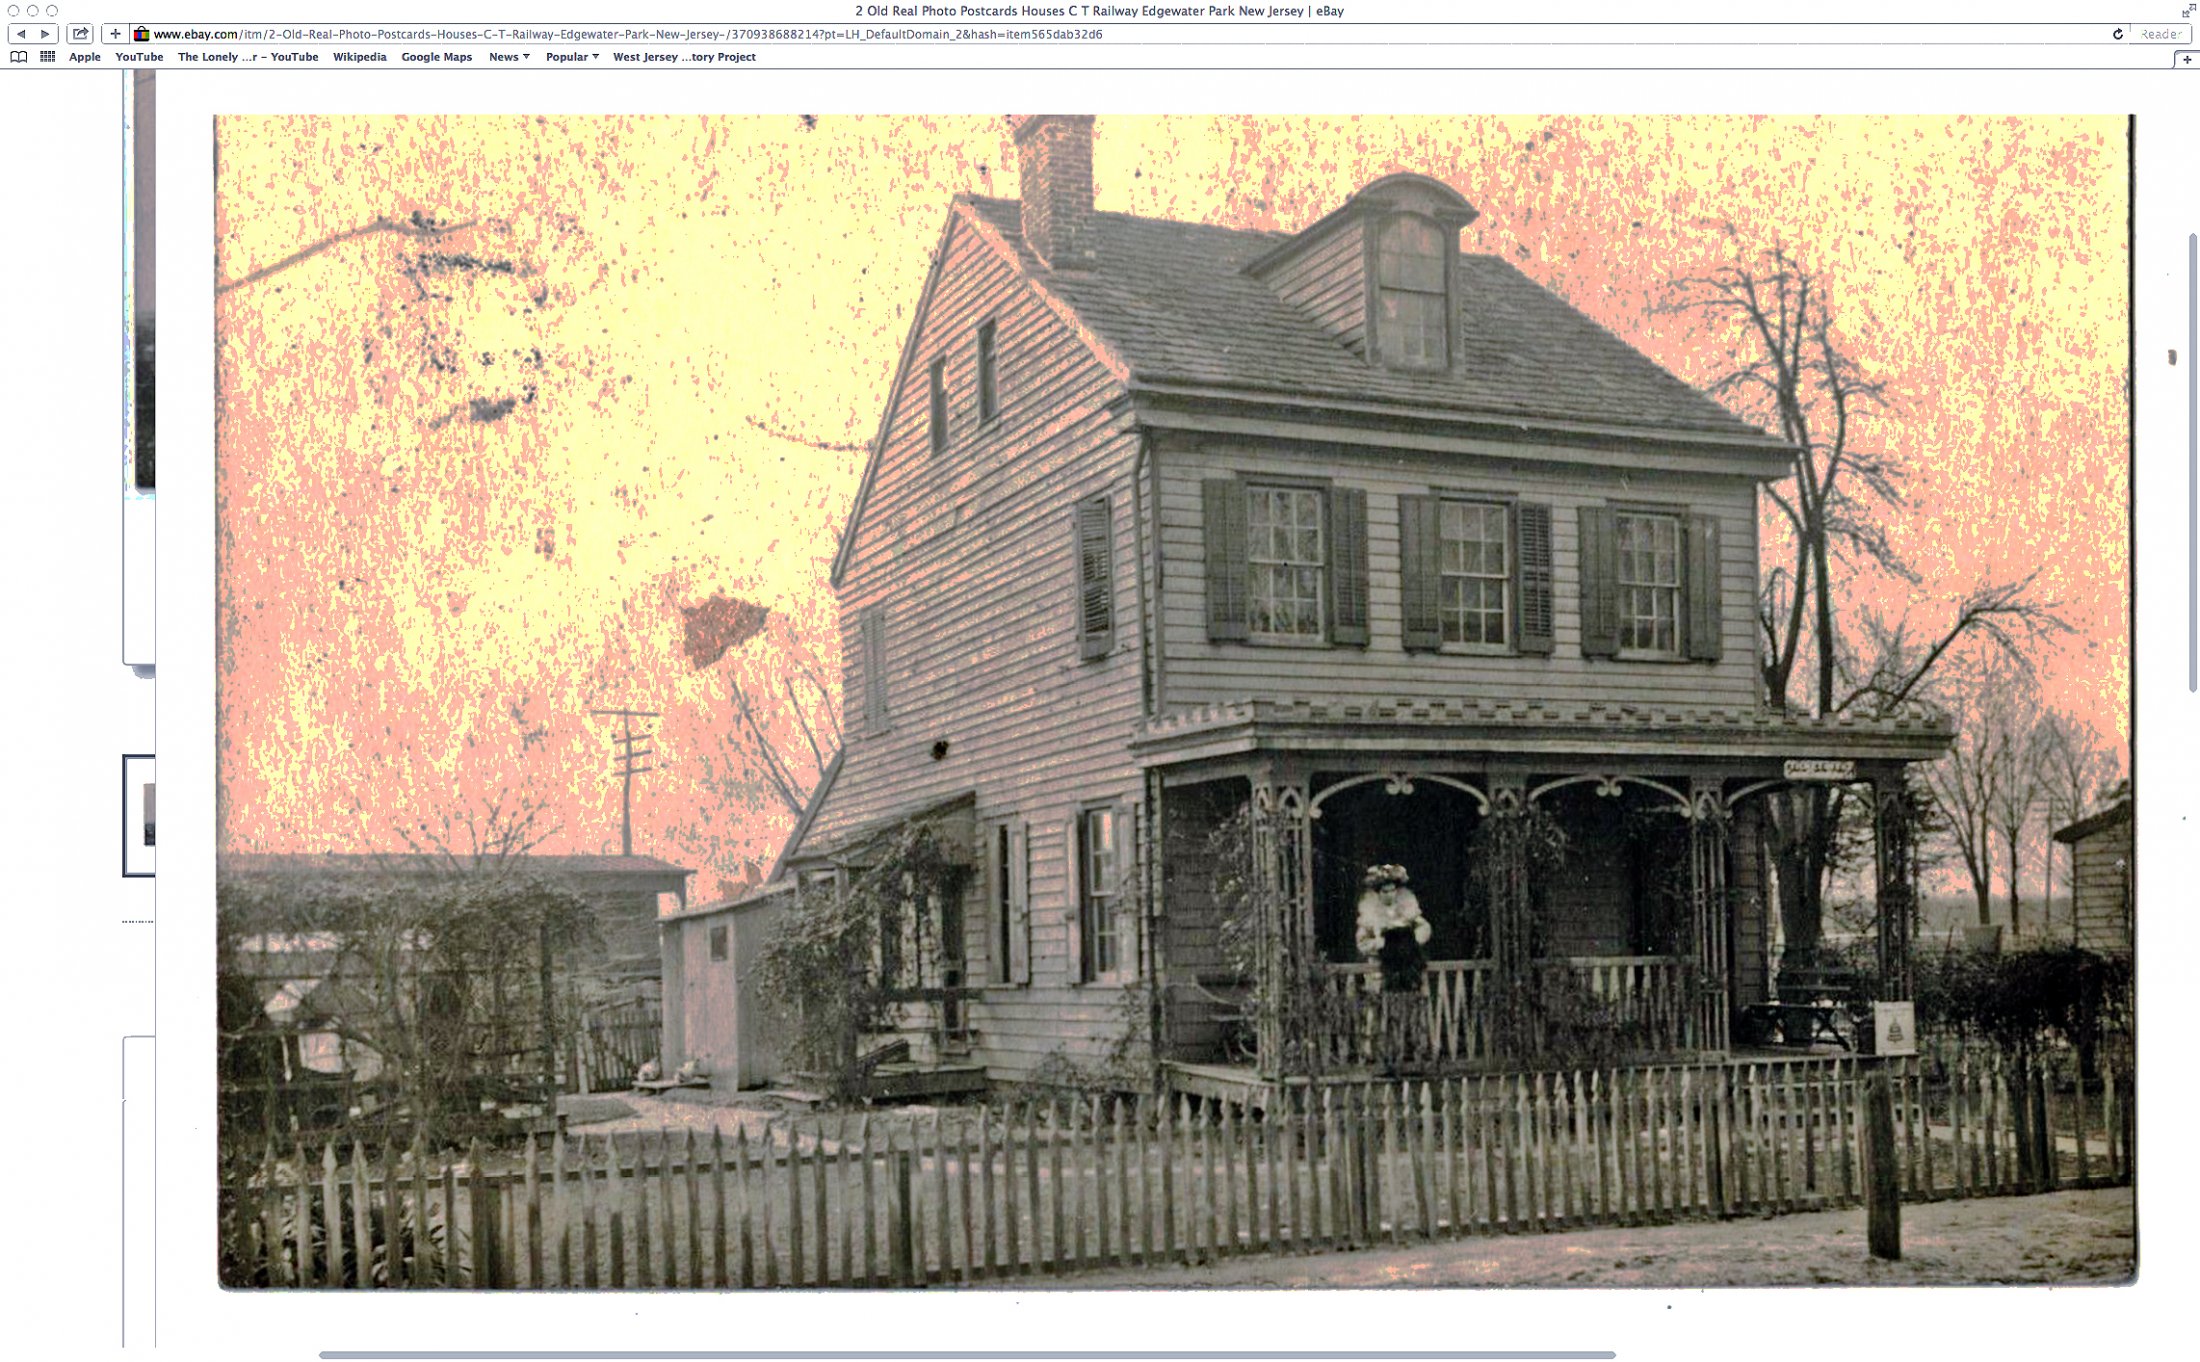 Edgewater Park - House or rooming house - c 1910